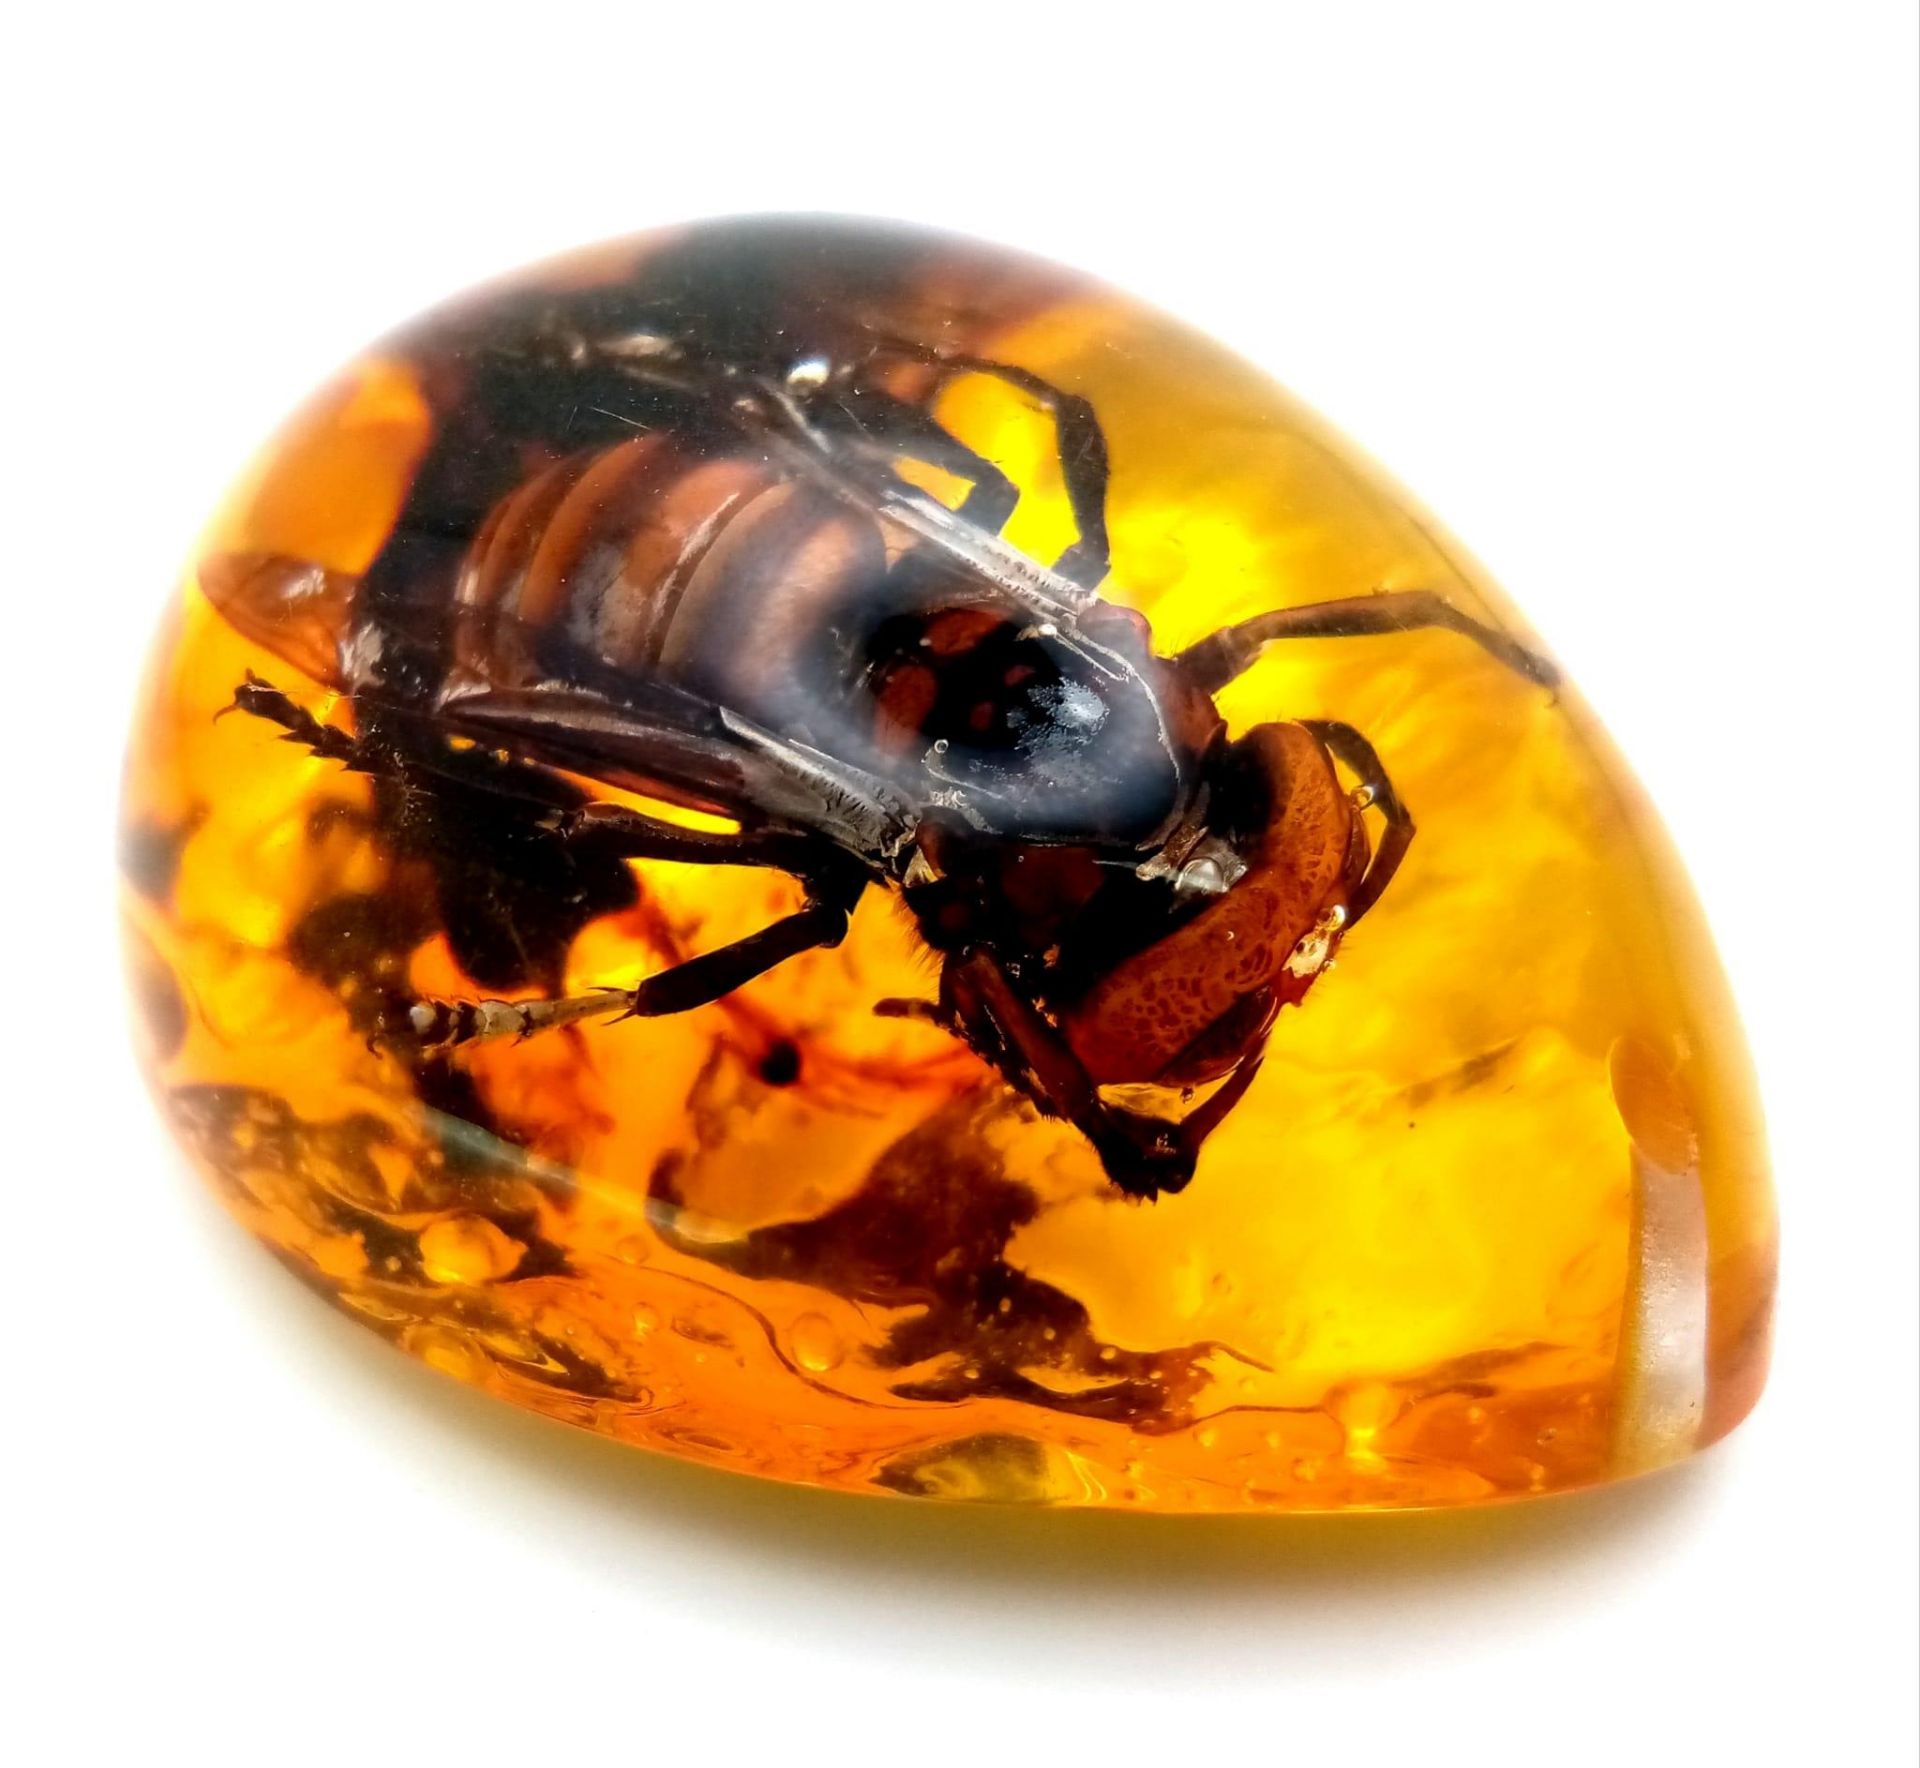 A Humongous Asian Hornet (possibly from another dimension) in an Amber Resin Prison. Pendant or